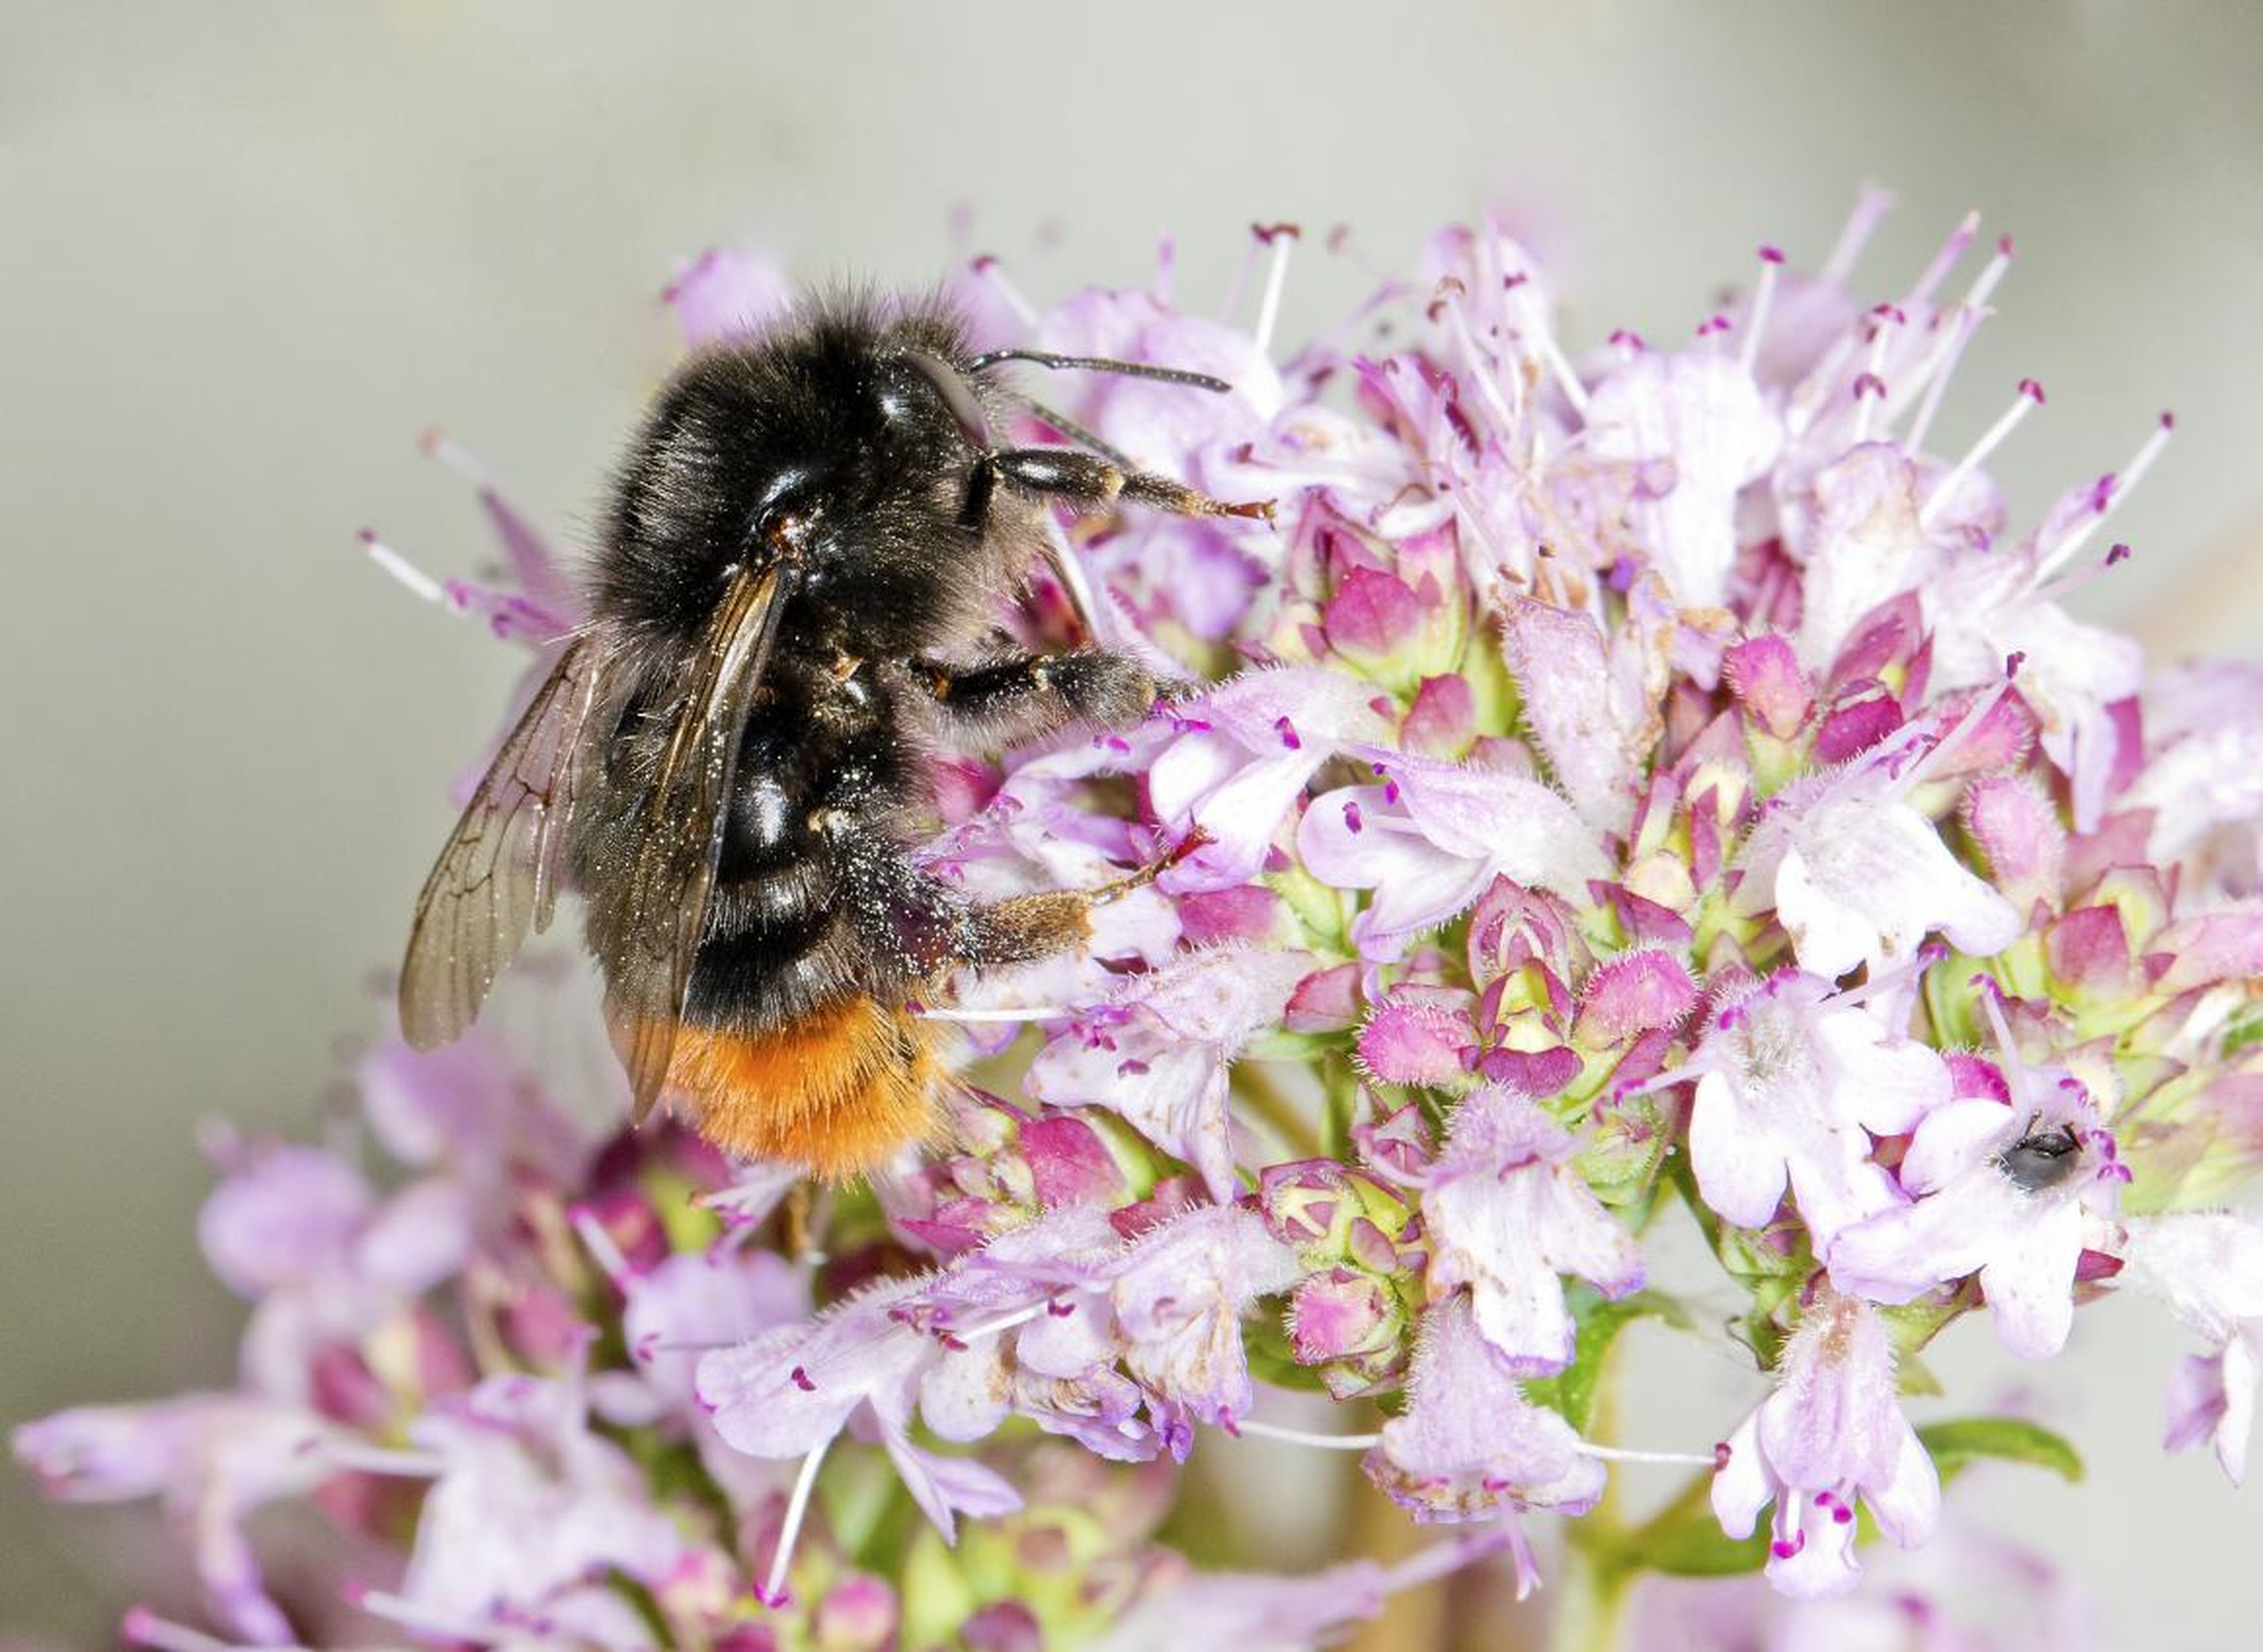 Bombus ruderarius, or the Red-shanked Carder Bee, was formerly a widespread bumblebee species found in much of England and Wales, and parts of Scotland. But the species declined by 42% between 1980 and 2013.